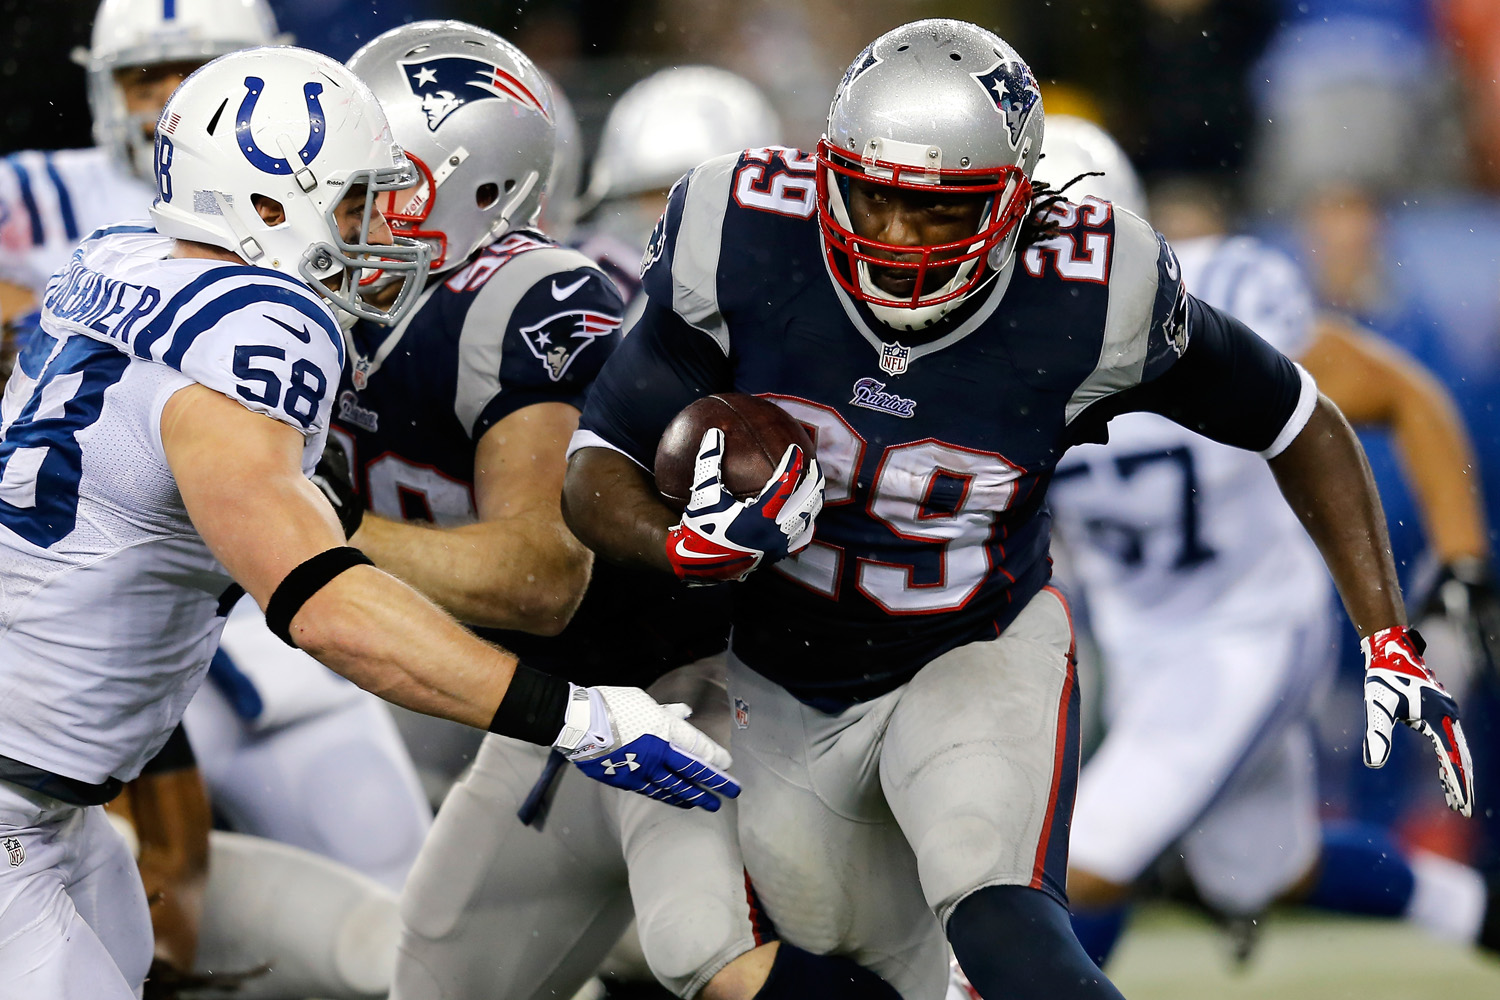 Divisional Playoffs - Indianapolis Colts v New England Patriots